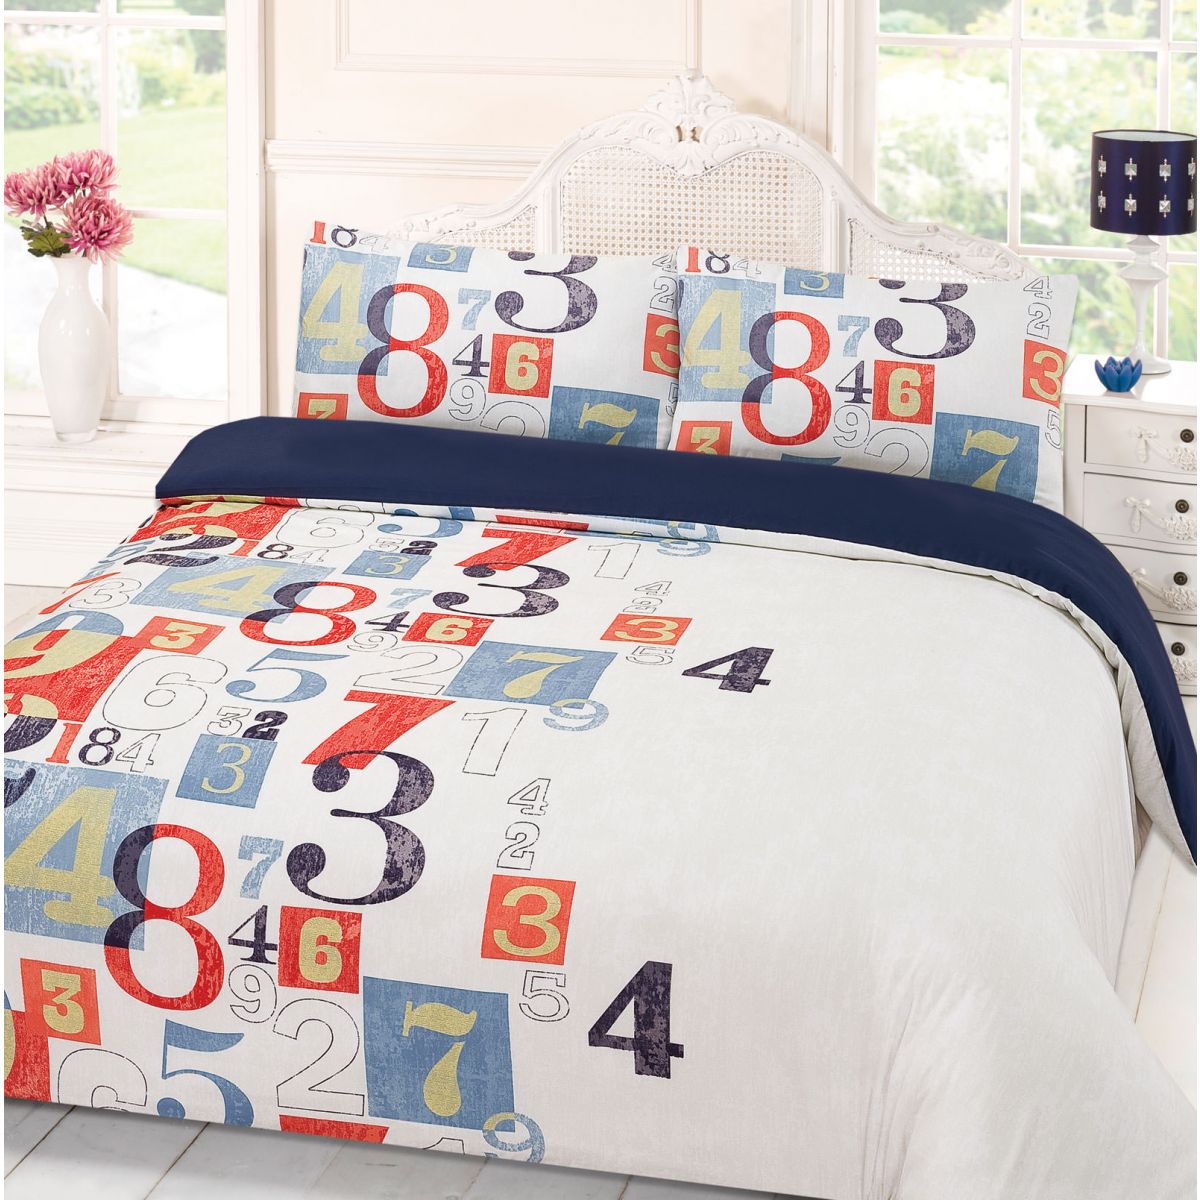 Duvet Cover with Pillowcase Bedding Set Digit Blue Yellow - Double